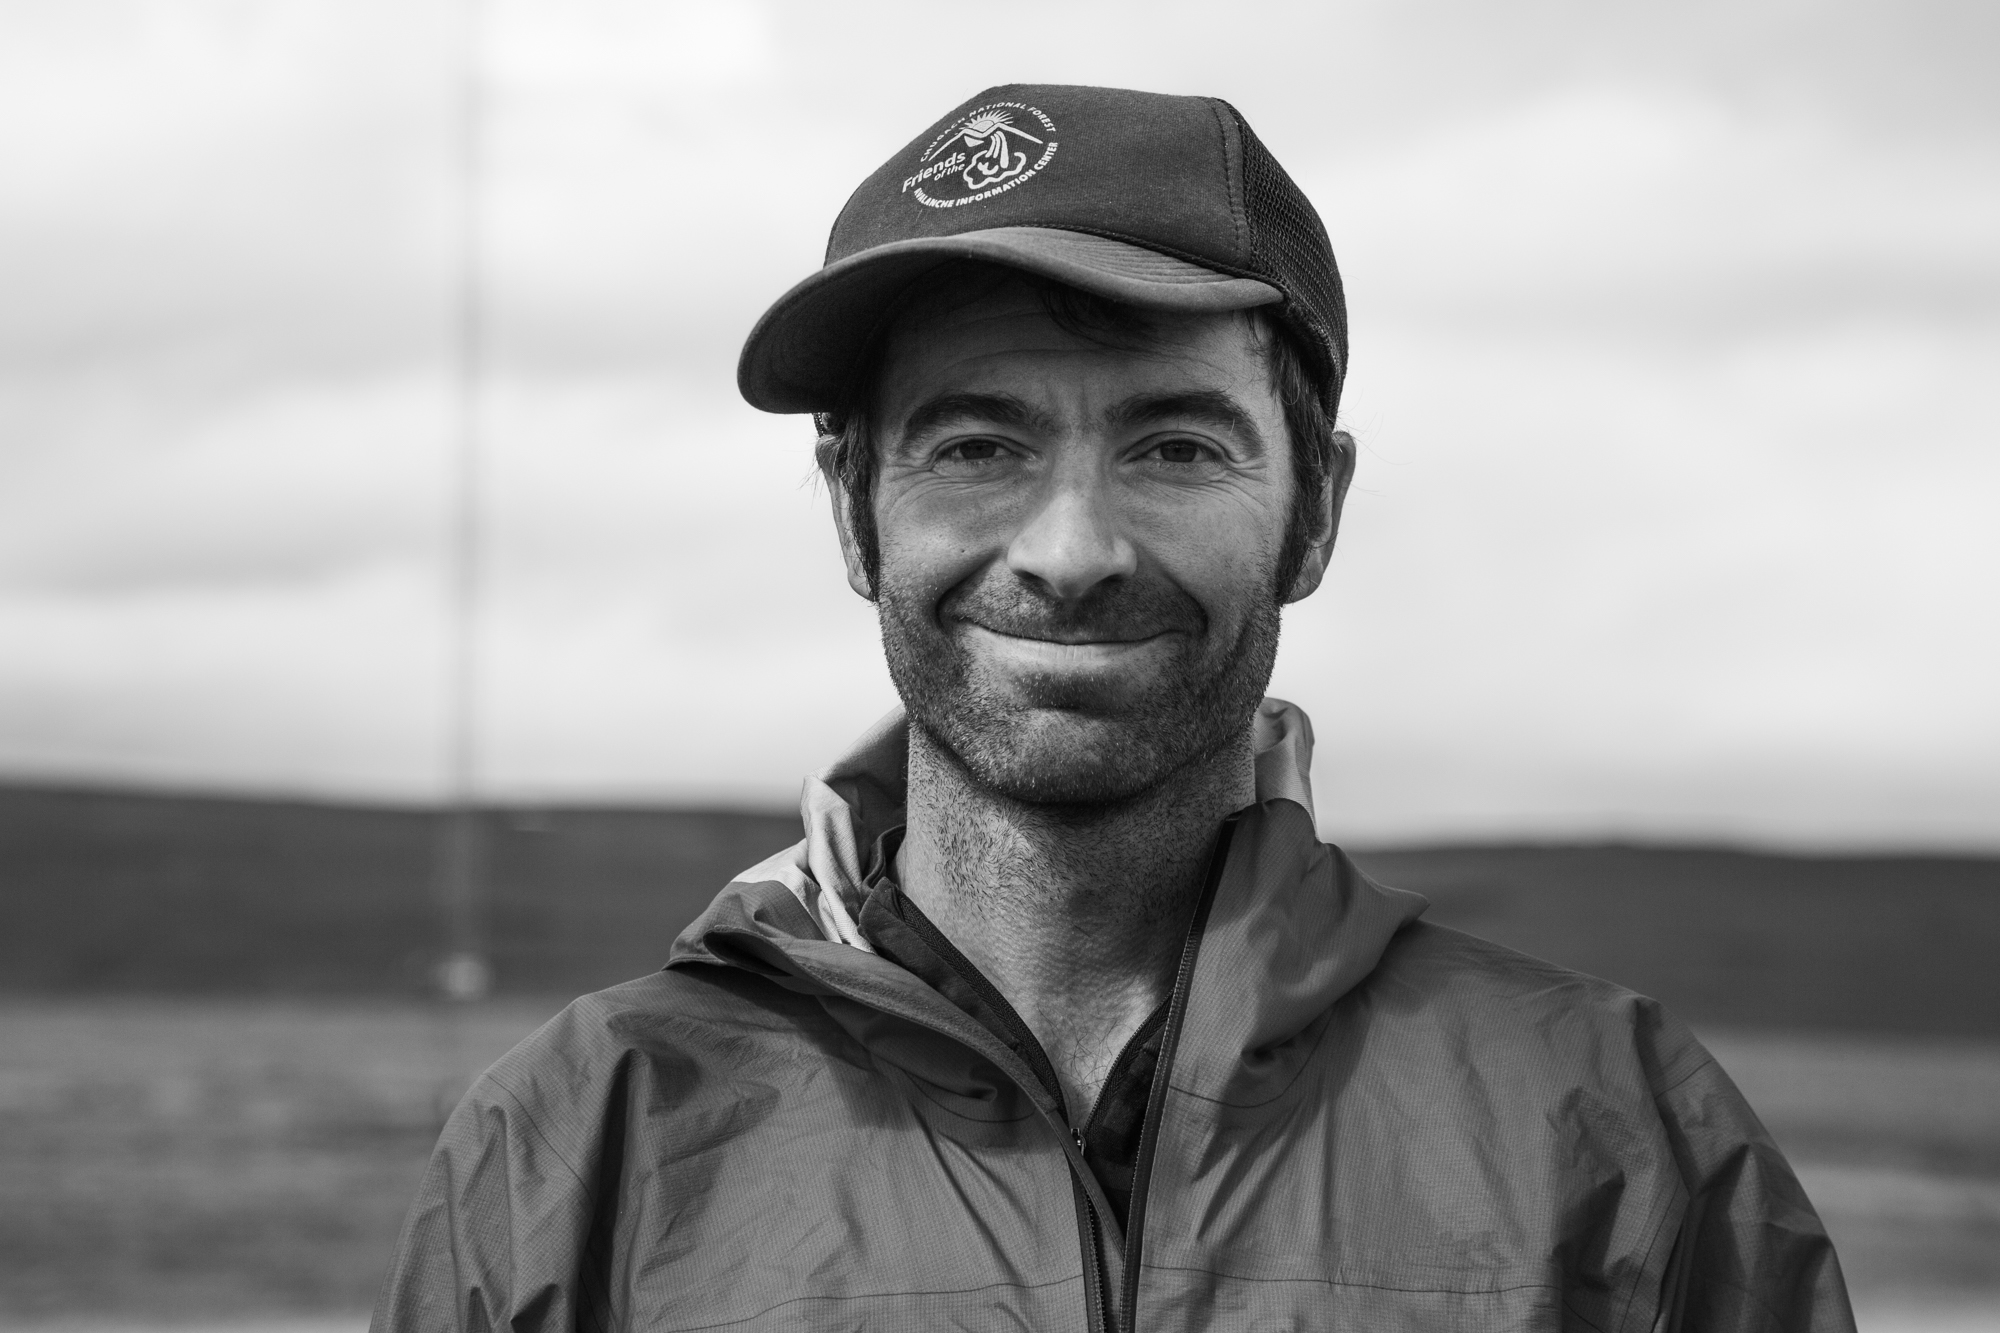 Profile image of Luc Mehl. He's smiling at the camera, wearing a trucker hat and a raincoat.